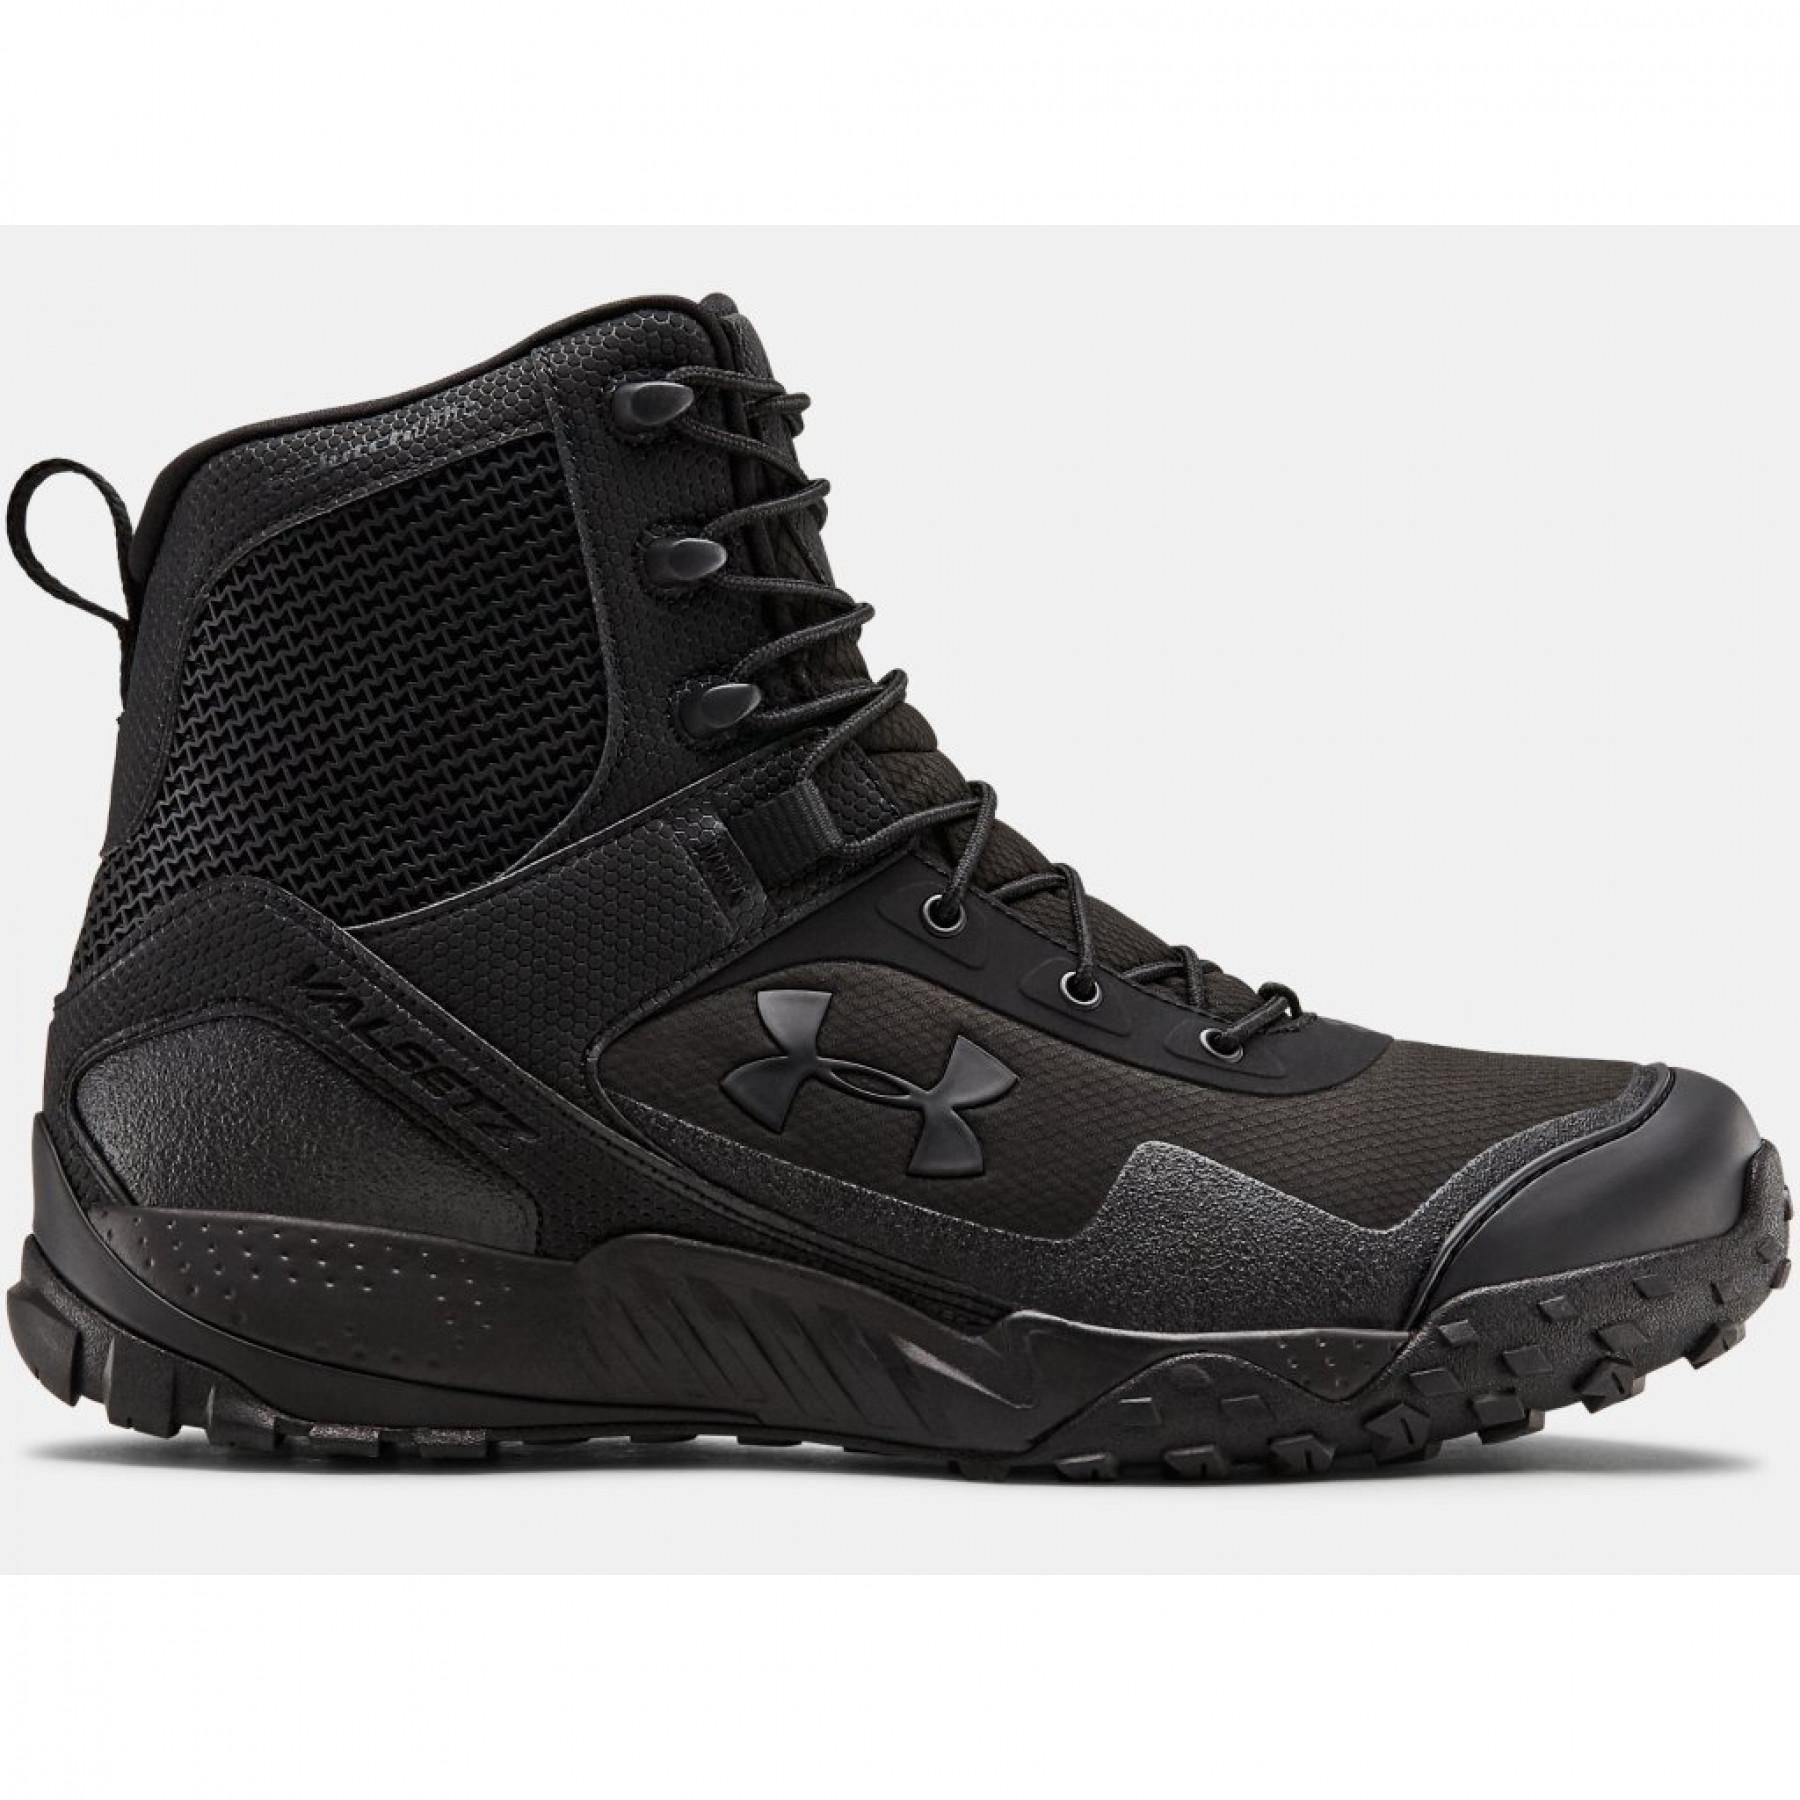 Shoes with side zipper Under Armour Valsetz RTS 1.5